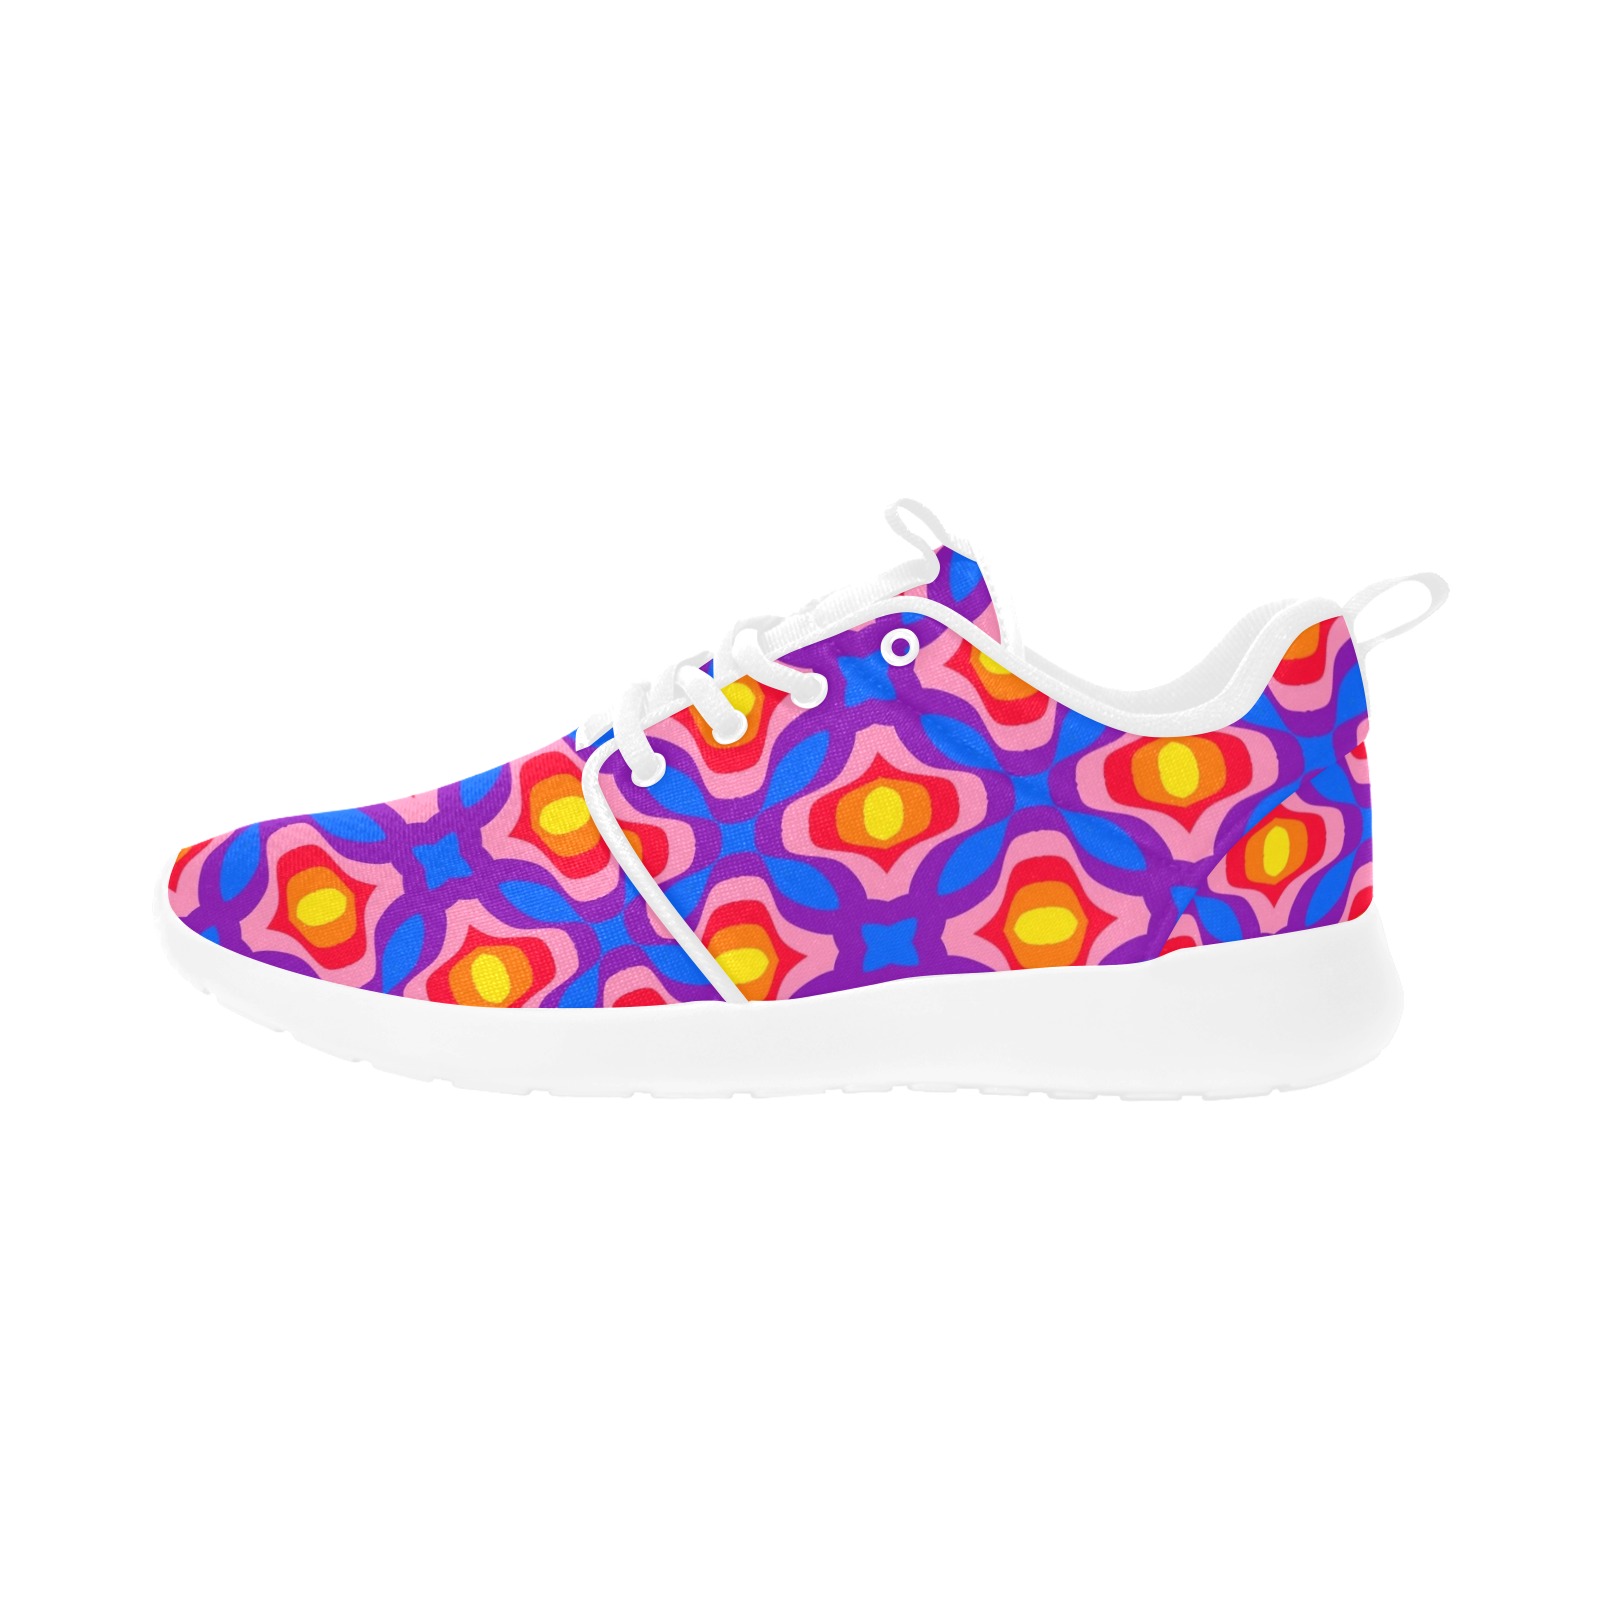 Retro Mod Abstract - Repper Women's Pull Loop Sneakers (Model 02001)